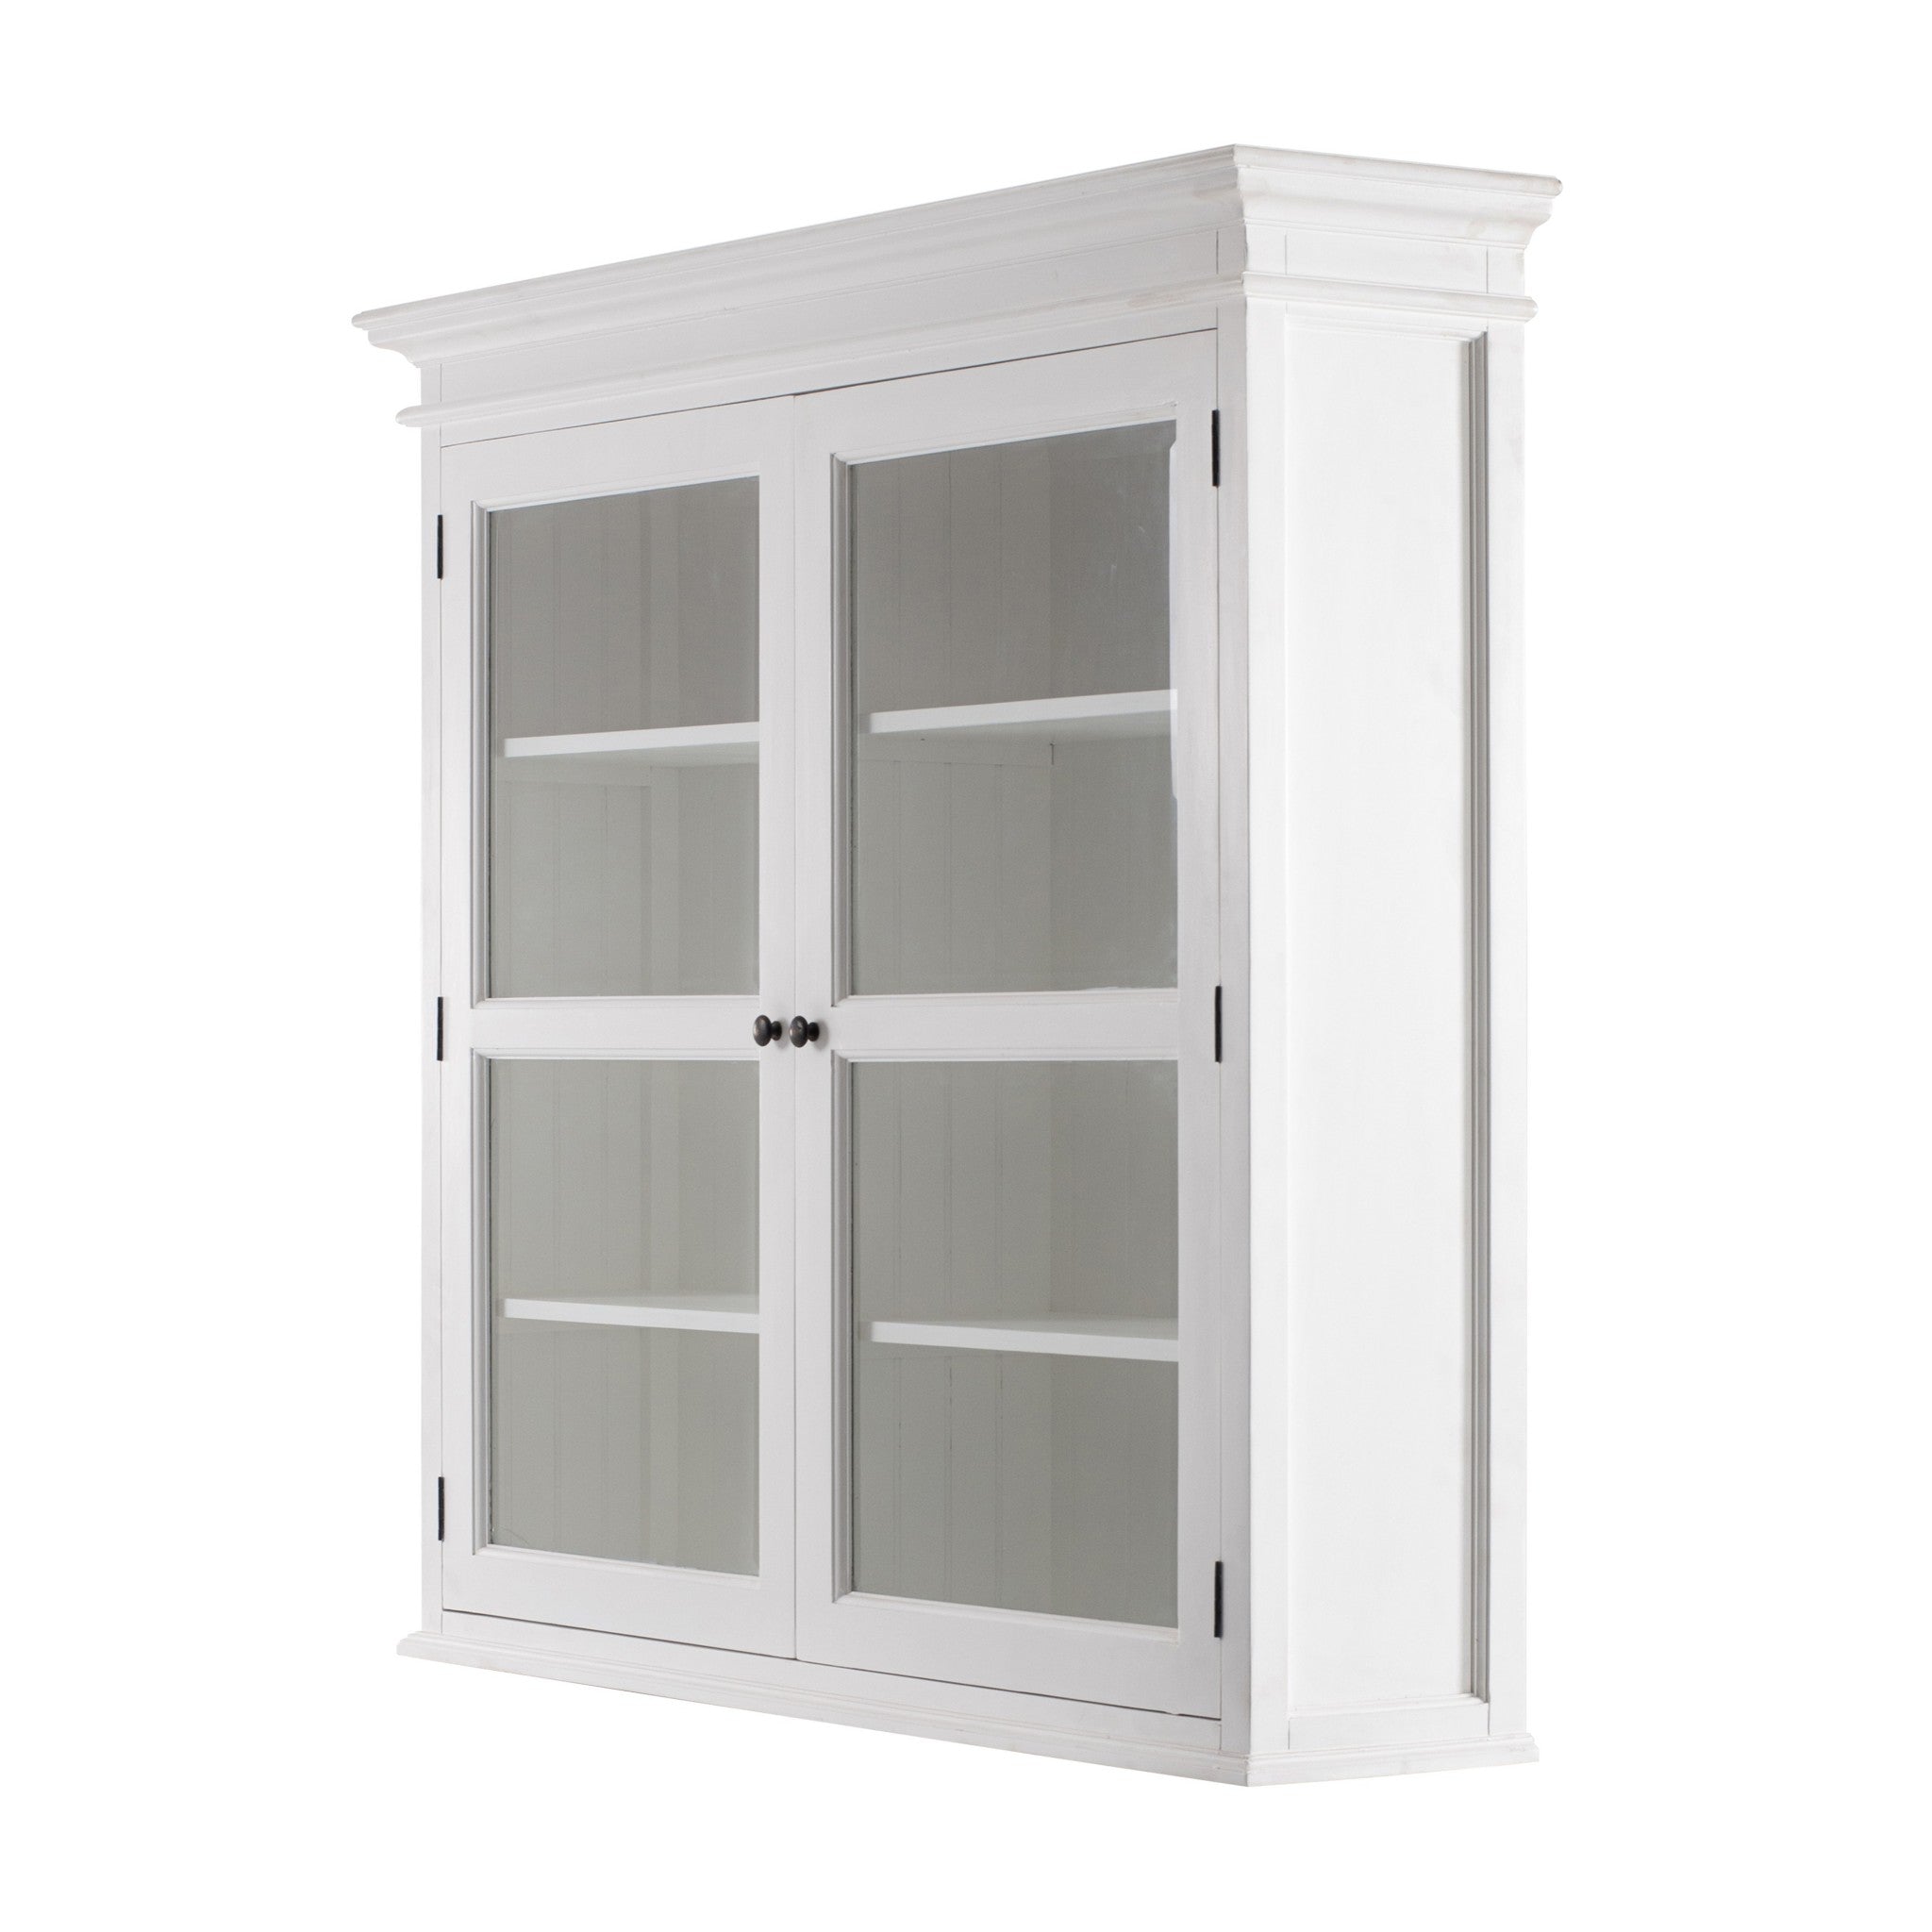 57" White Solid Wood Frame Dining Hutch With Twelve Shelves And Two Drawers